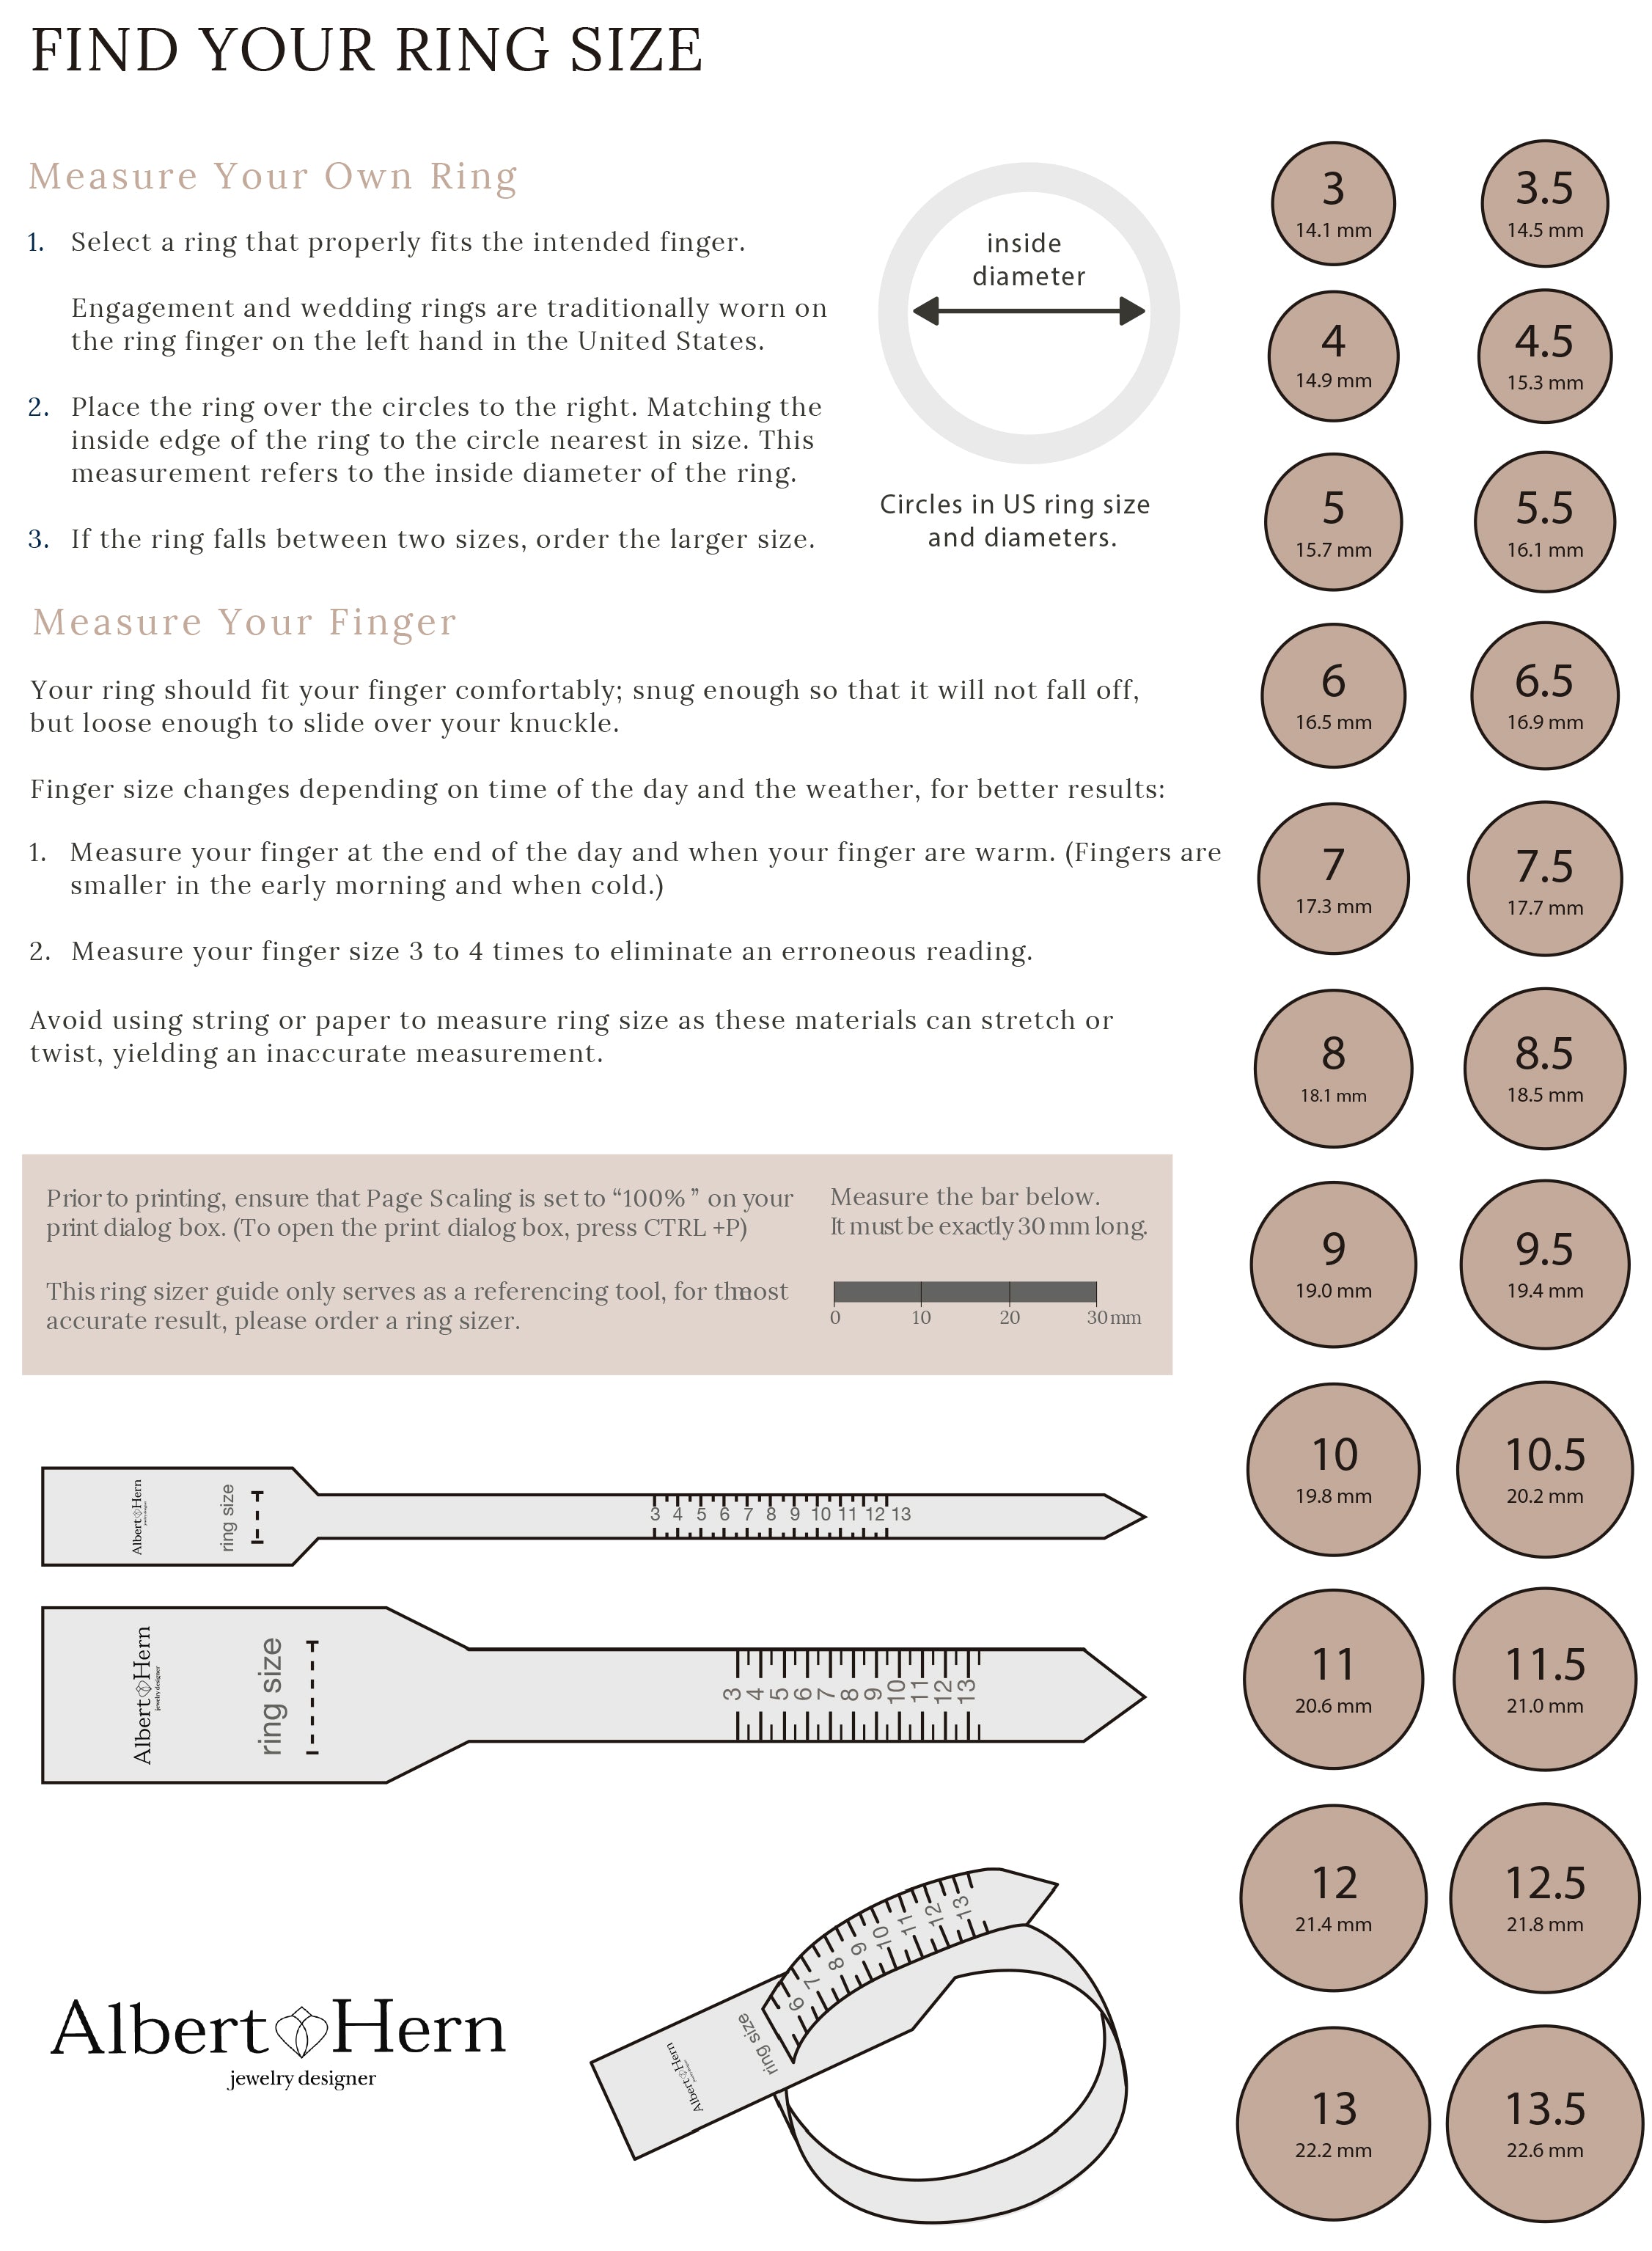 Ring size chart: How to measure ring size at home?